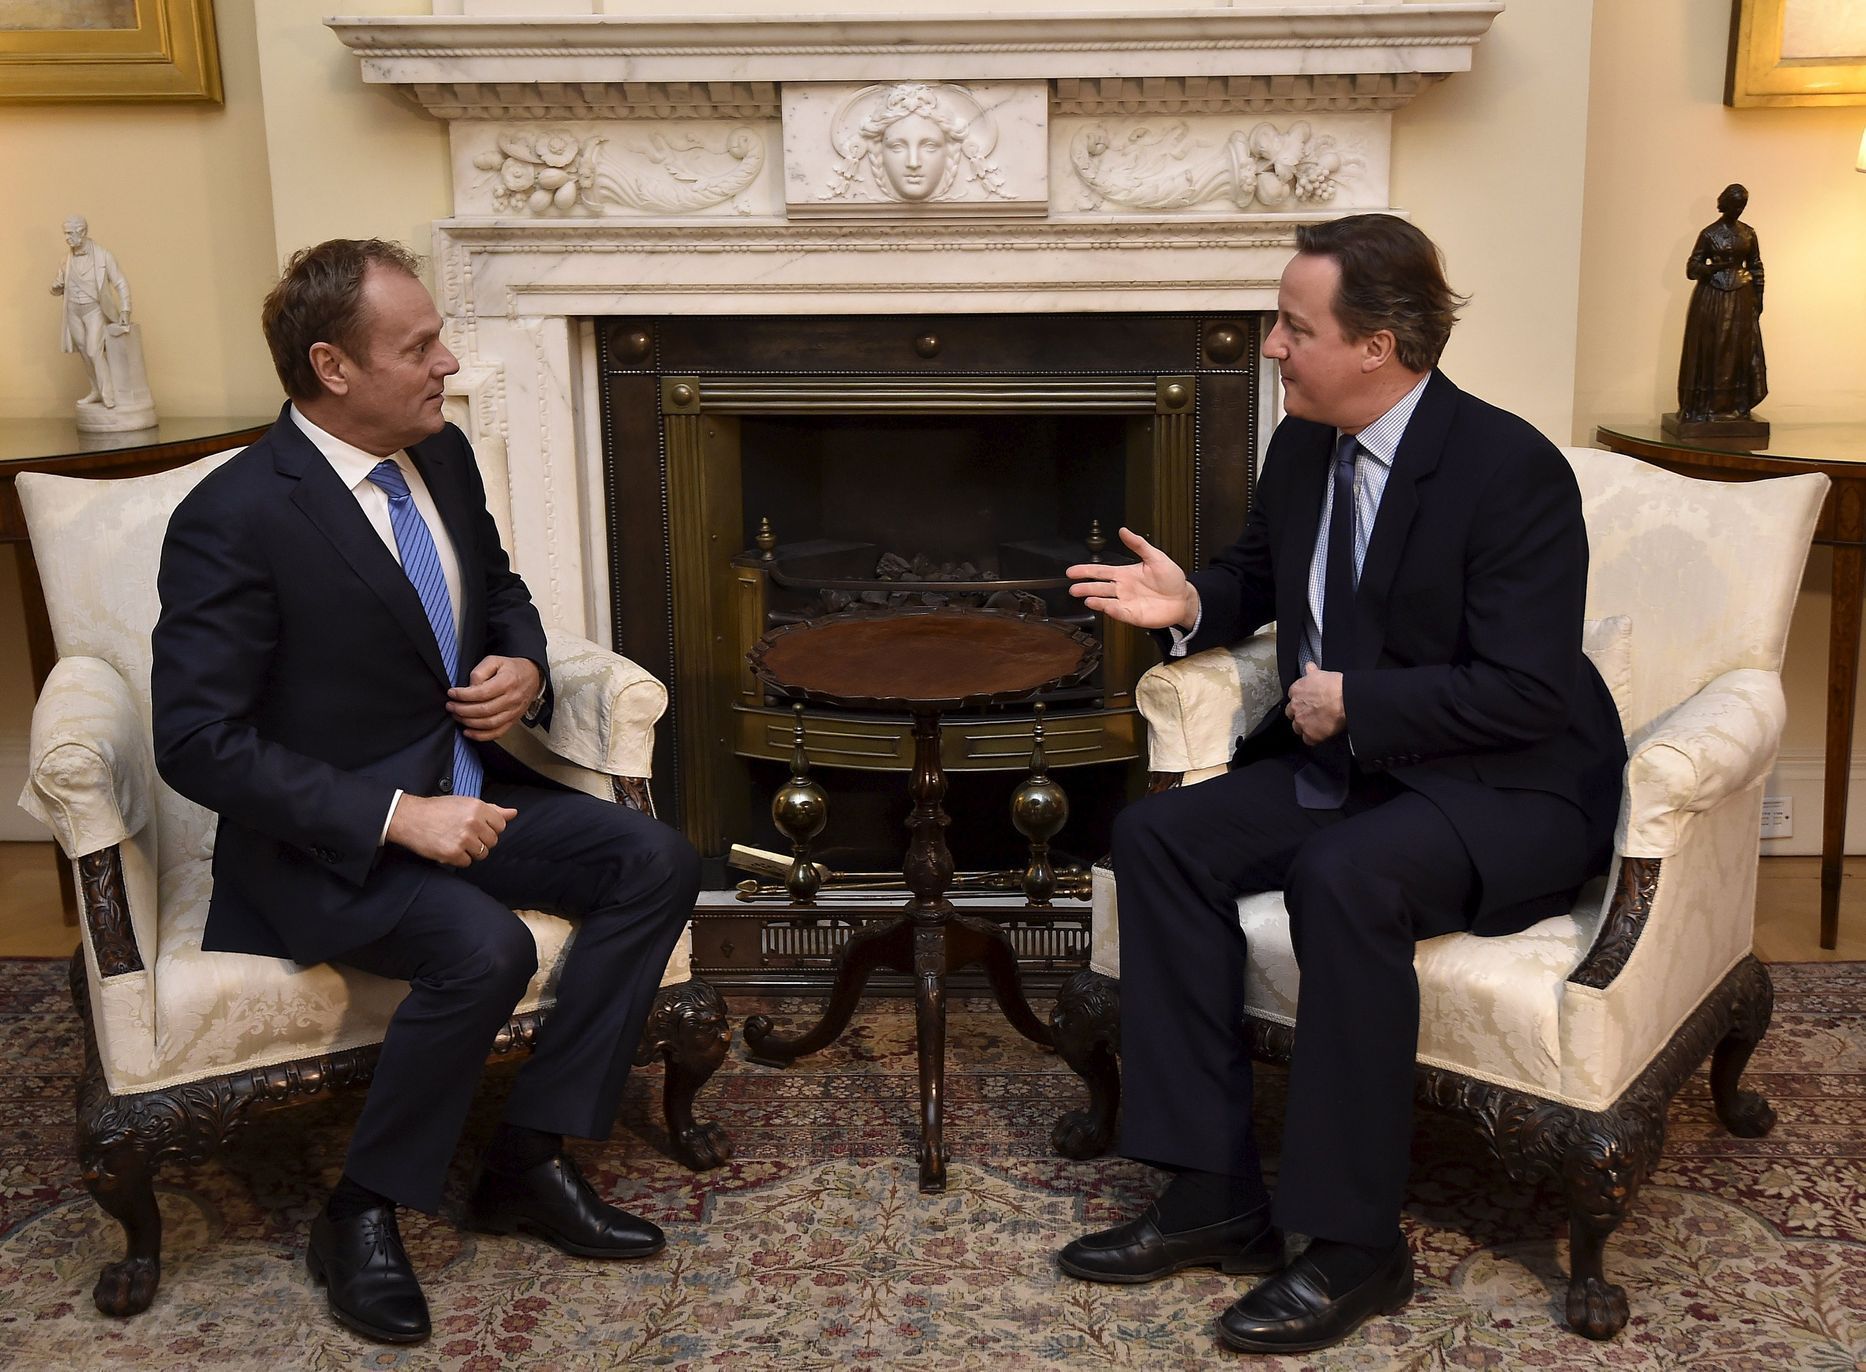 British Prime Minister Cameron speaks with European Council President Tusk at Downing Street in London, Britain